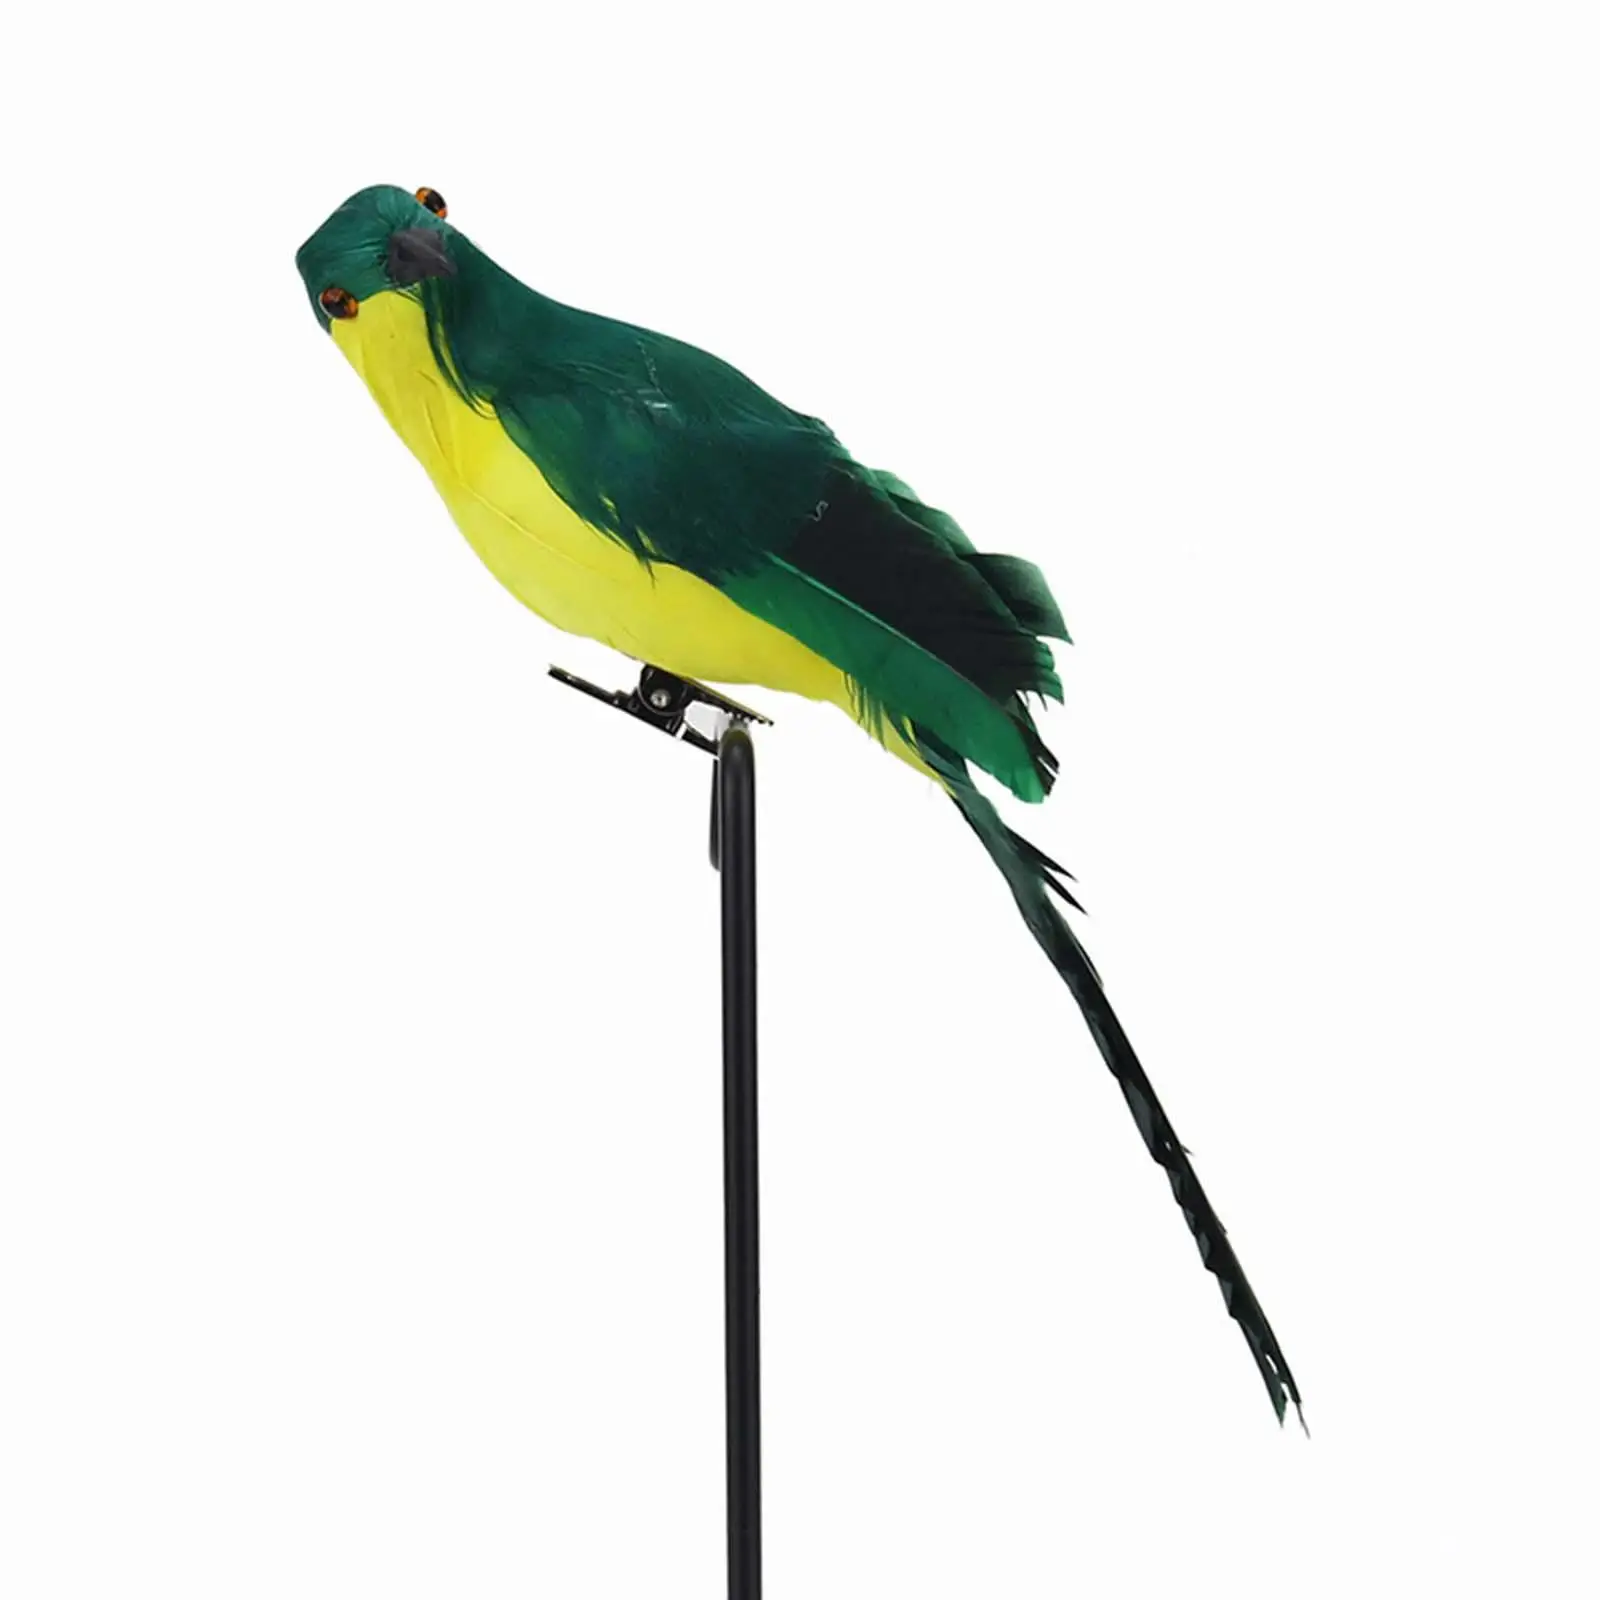  Macaw Artificial Birds  Housewarming Gifts Bird Parrot Model Feather Parrot for Landscape Wedding Wall Tree Outsideration